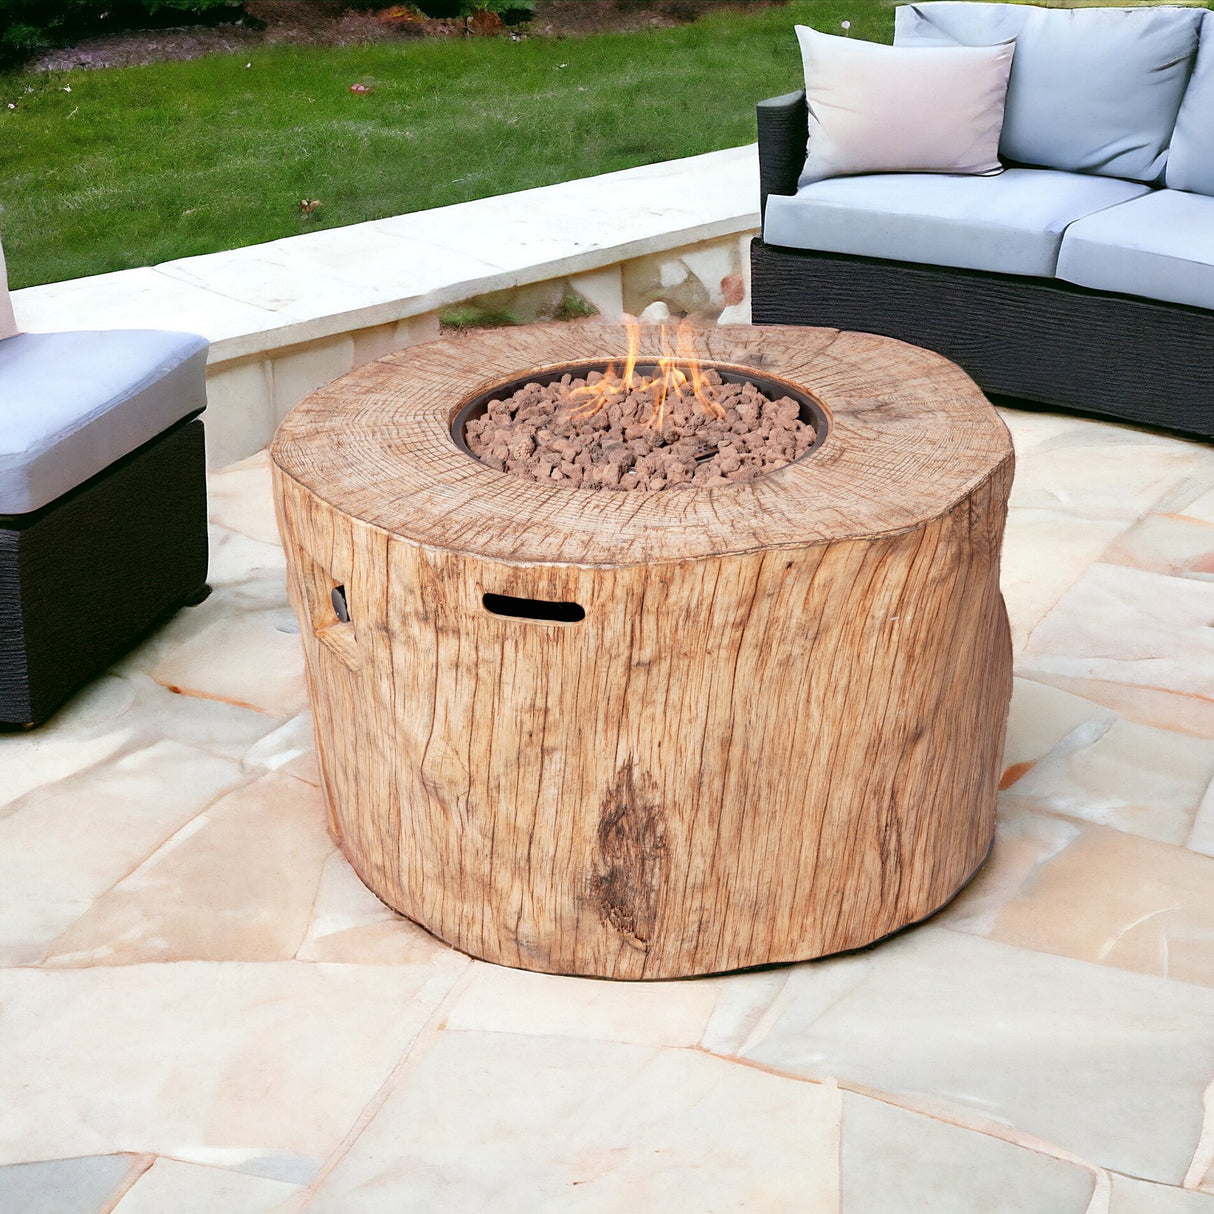 37" Brown Faux Wood Stump Propane Round Fire pit With Cover